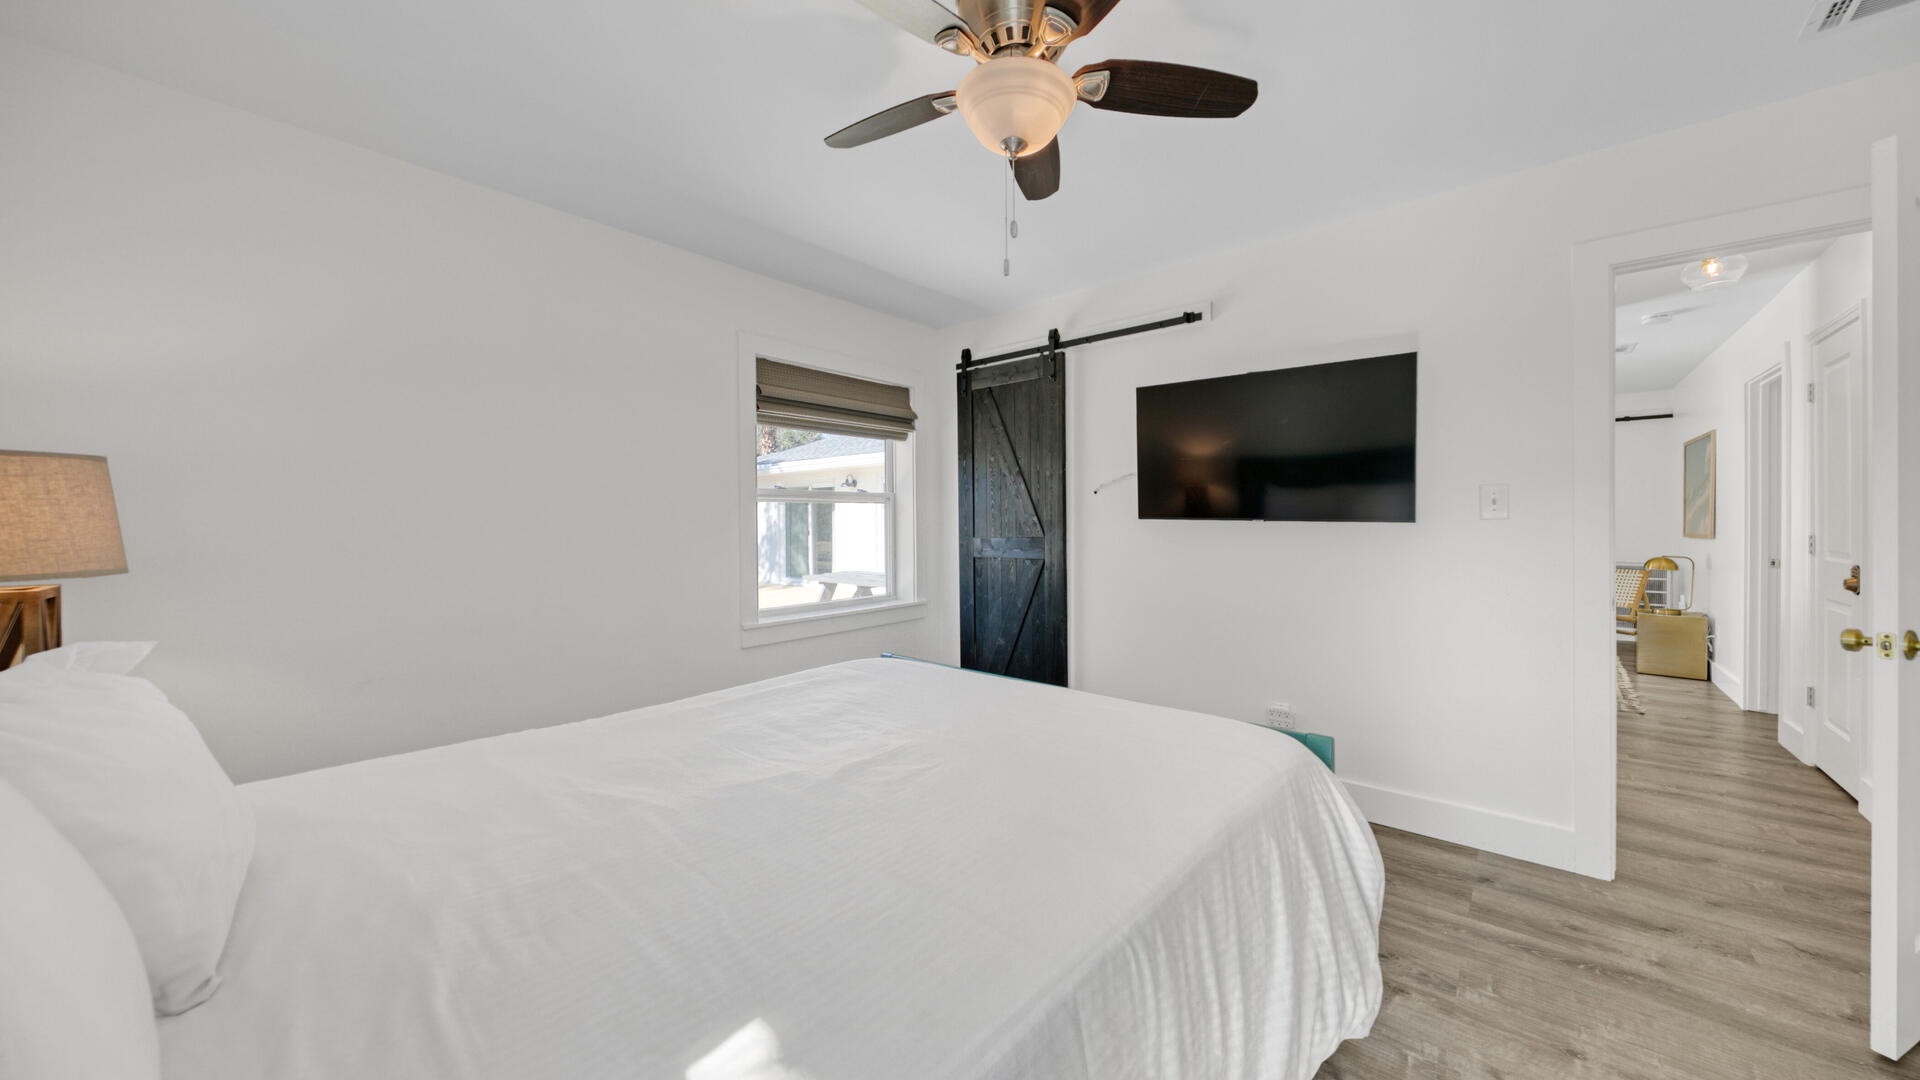 The 4th bedroom offers a queen bed with large flat screen TV!